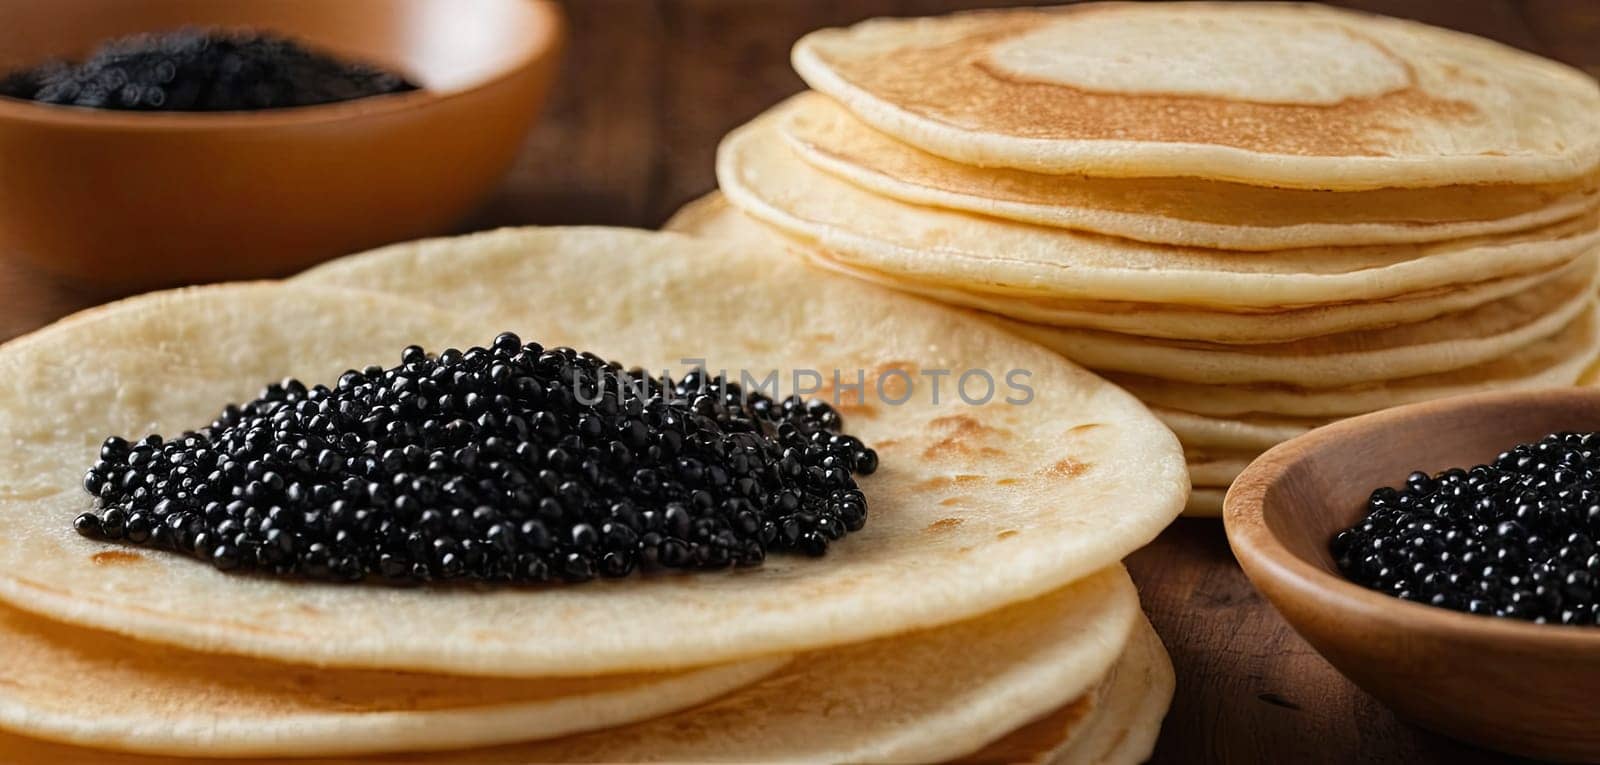 Pancakes with caviar for breakfast highlight luxury morning meal. Golden stack of thin pancakes or blini topped with black caviar by panophotograph